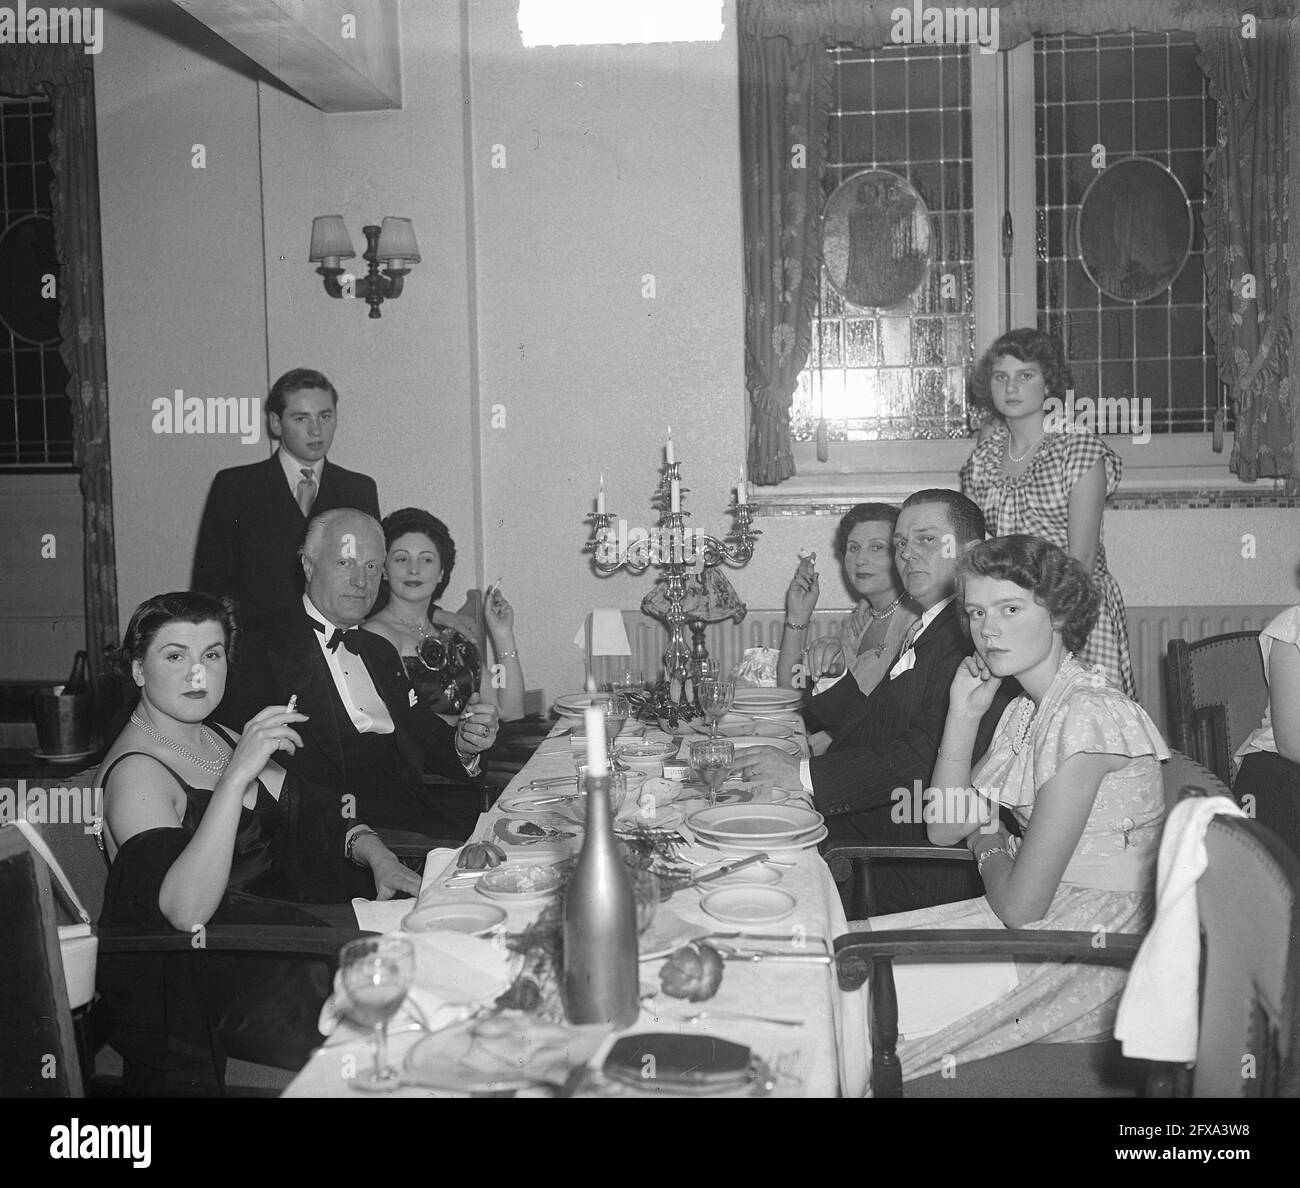 Chateau Bleu number 9, December 29, 1949, The Netherlands, 20th century press agency photo, news to remember, documentary, historic photography 1945-1990, visual stories, human history of the Twentieth Century, capturing moments in time Stock Photo